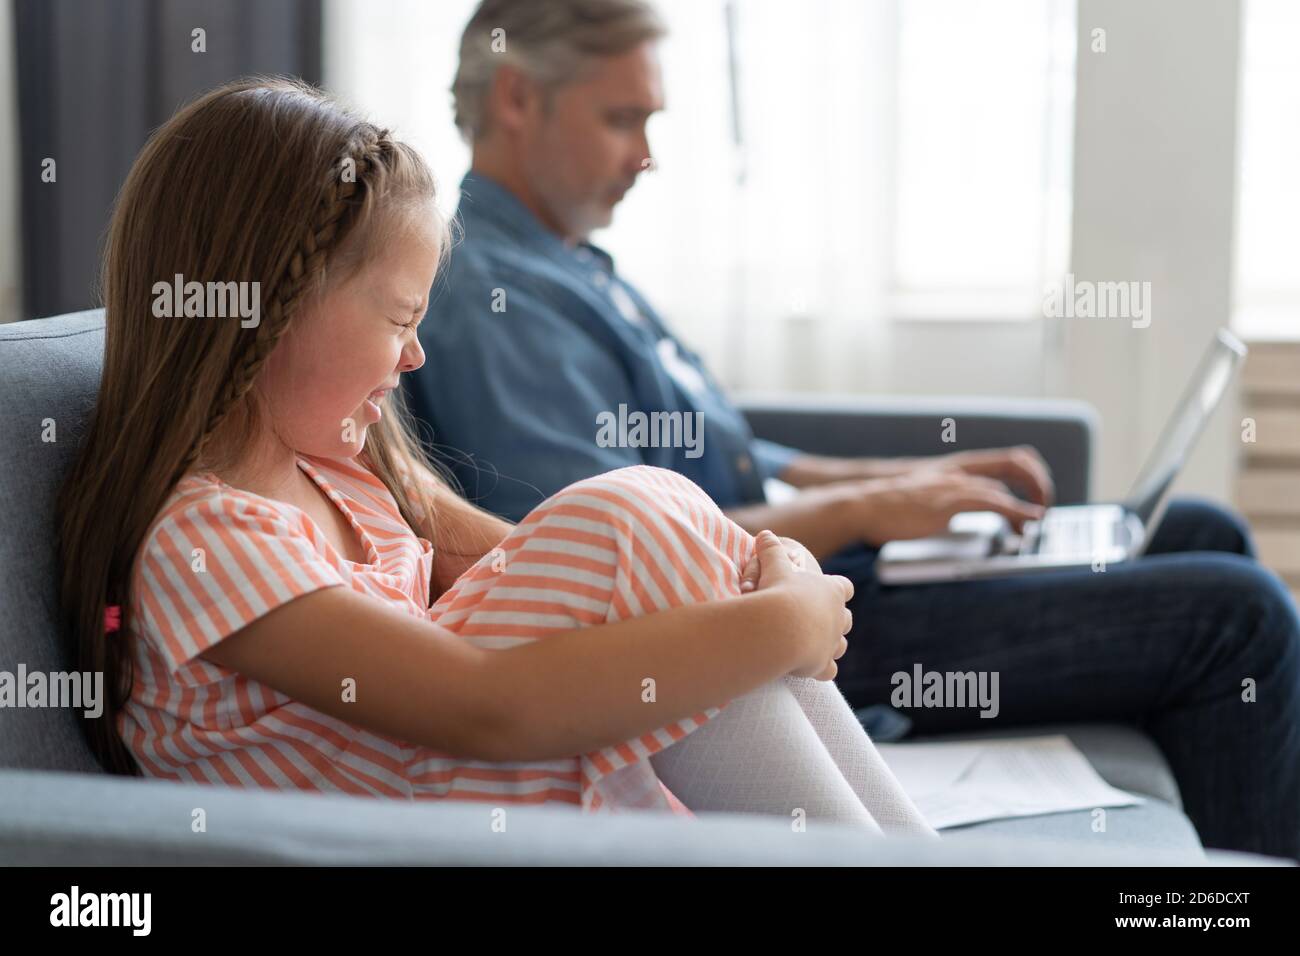 No Time For Child. Grey-haired dad busy with laptop, working online at home, sad bored offended daughter sitting near by Stock Photo